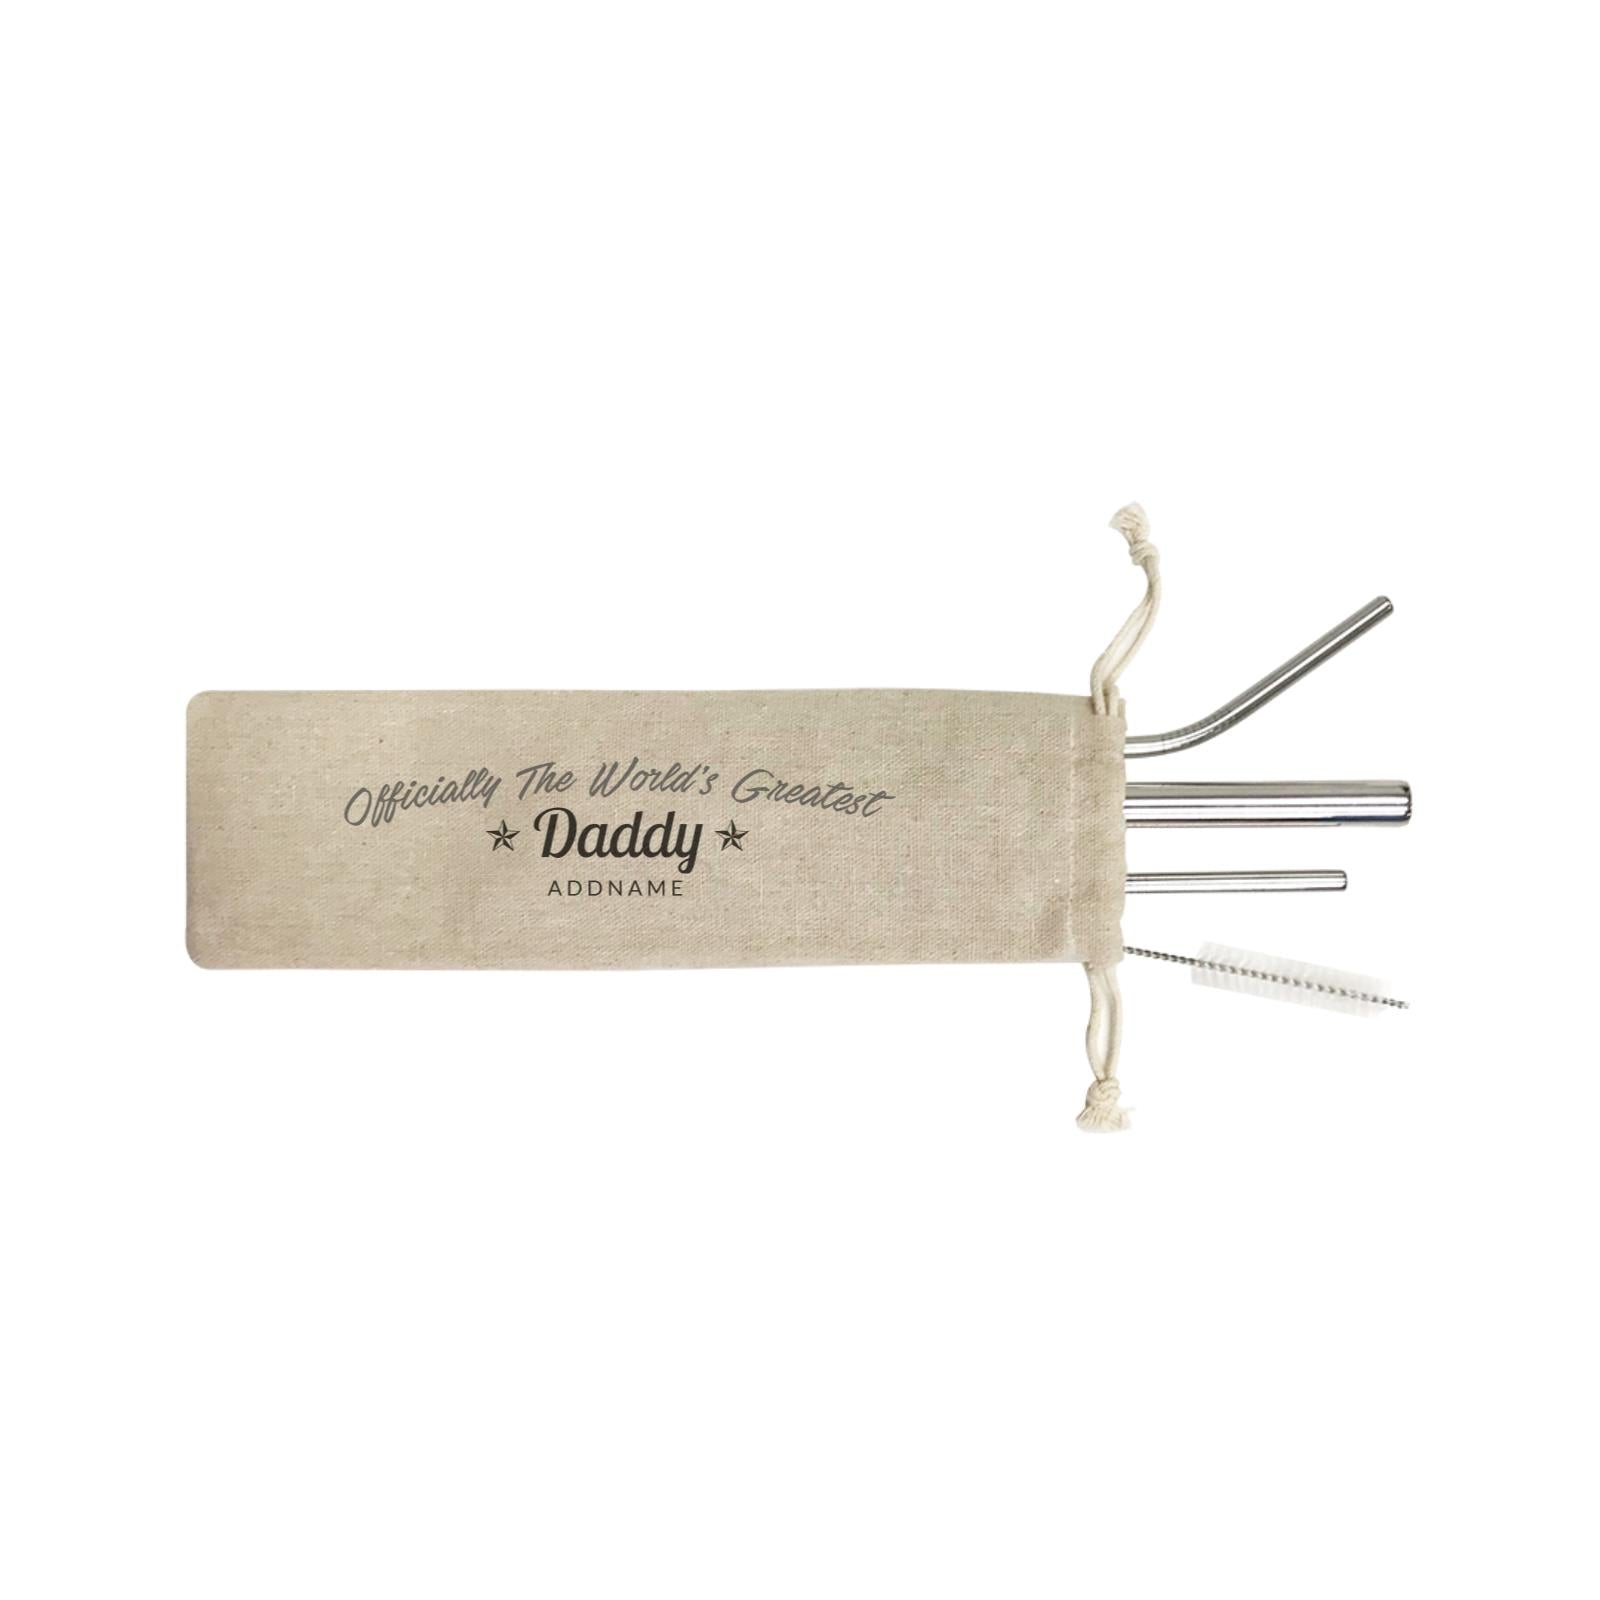 Officially Worlds Greatest Family Daddy Addname SB 4-In-1 Stainless Steel Straw Set in Satchel